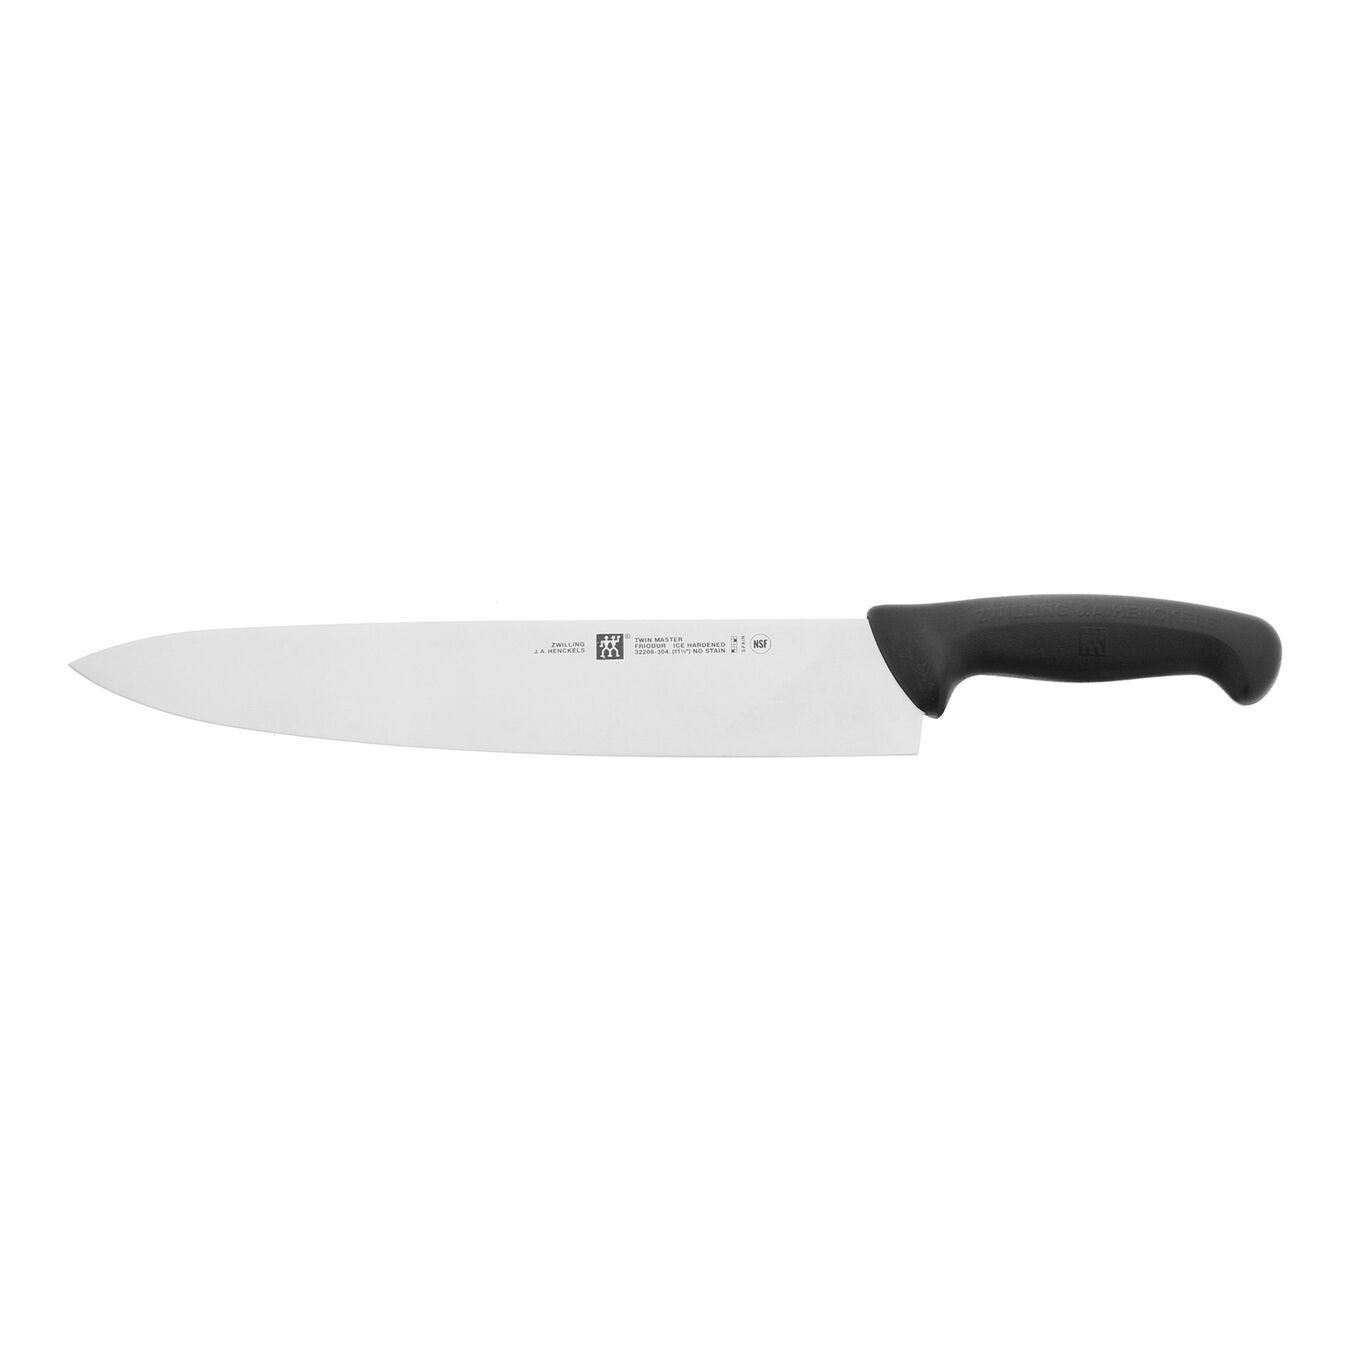 11.5-inch, Chef's Knife - Black Handle,,large 1